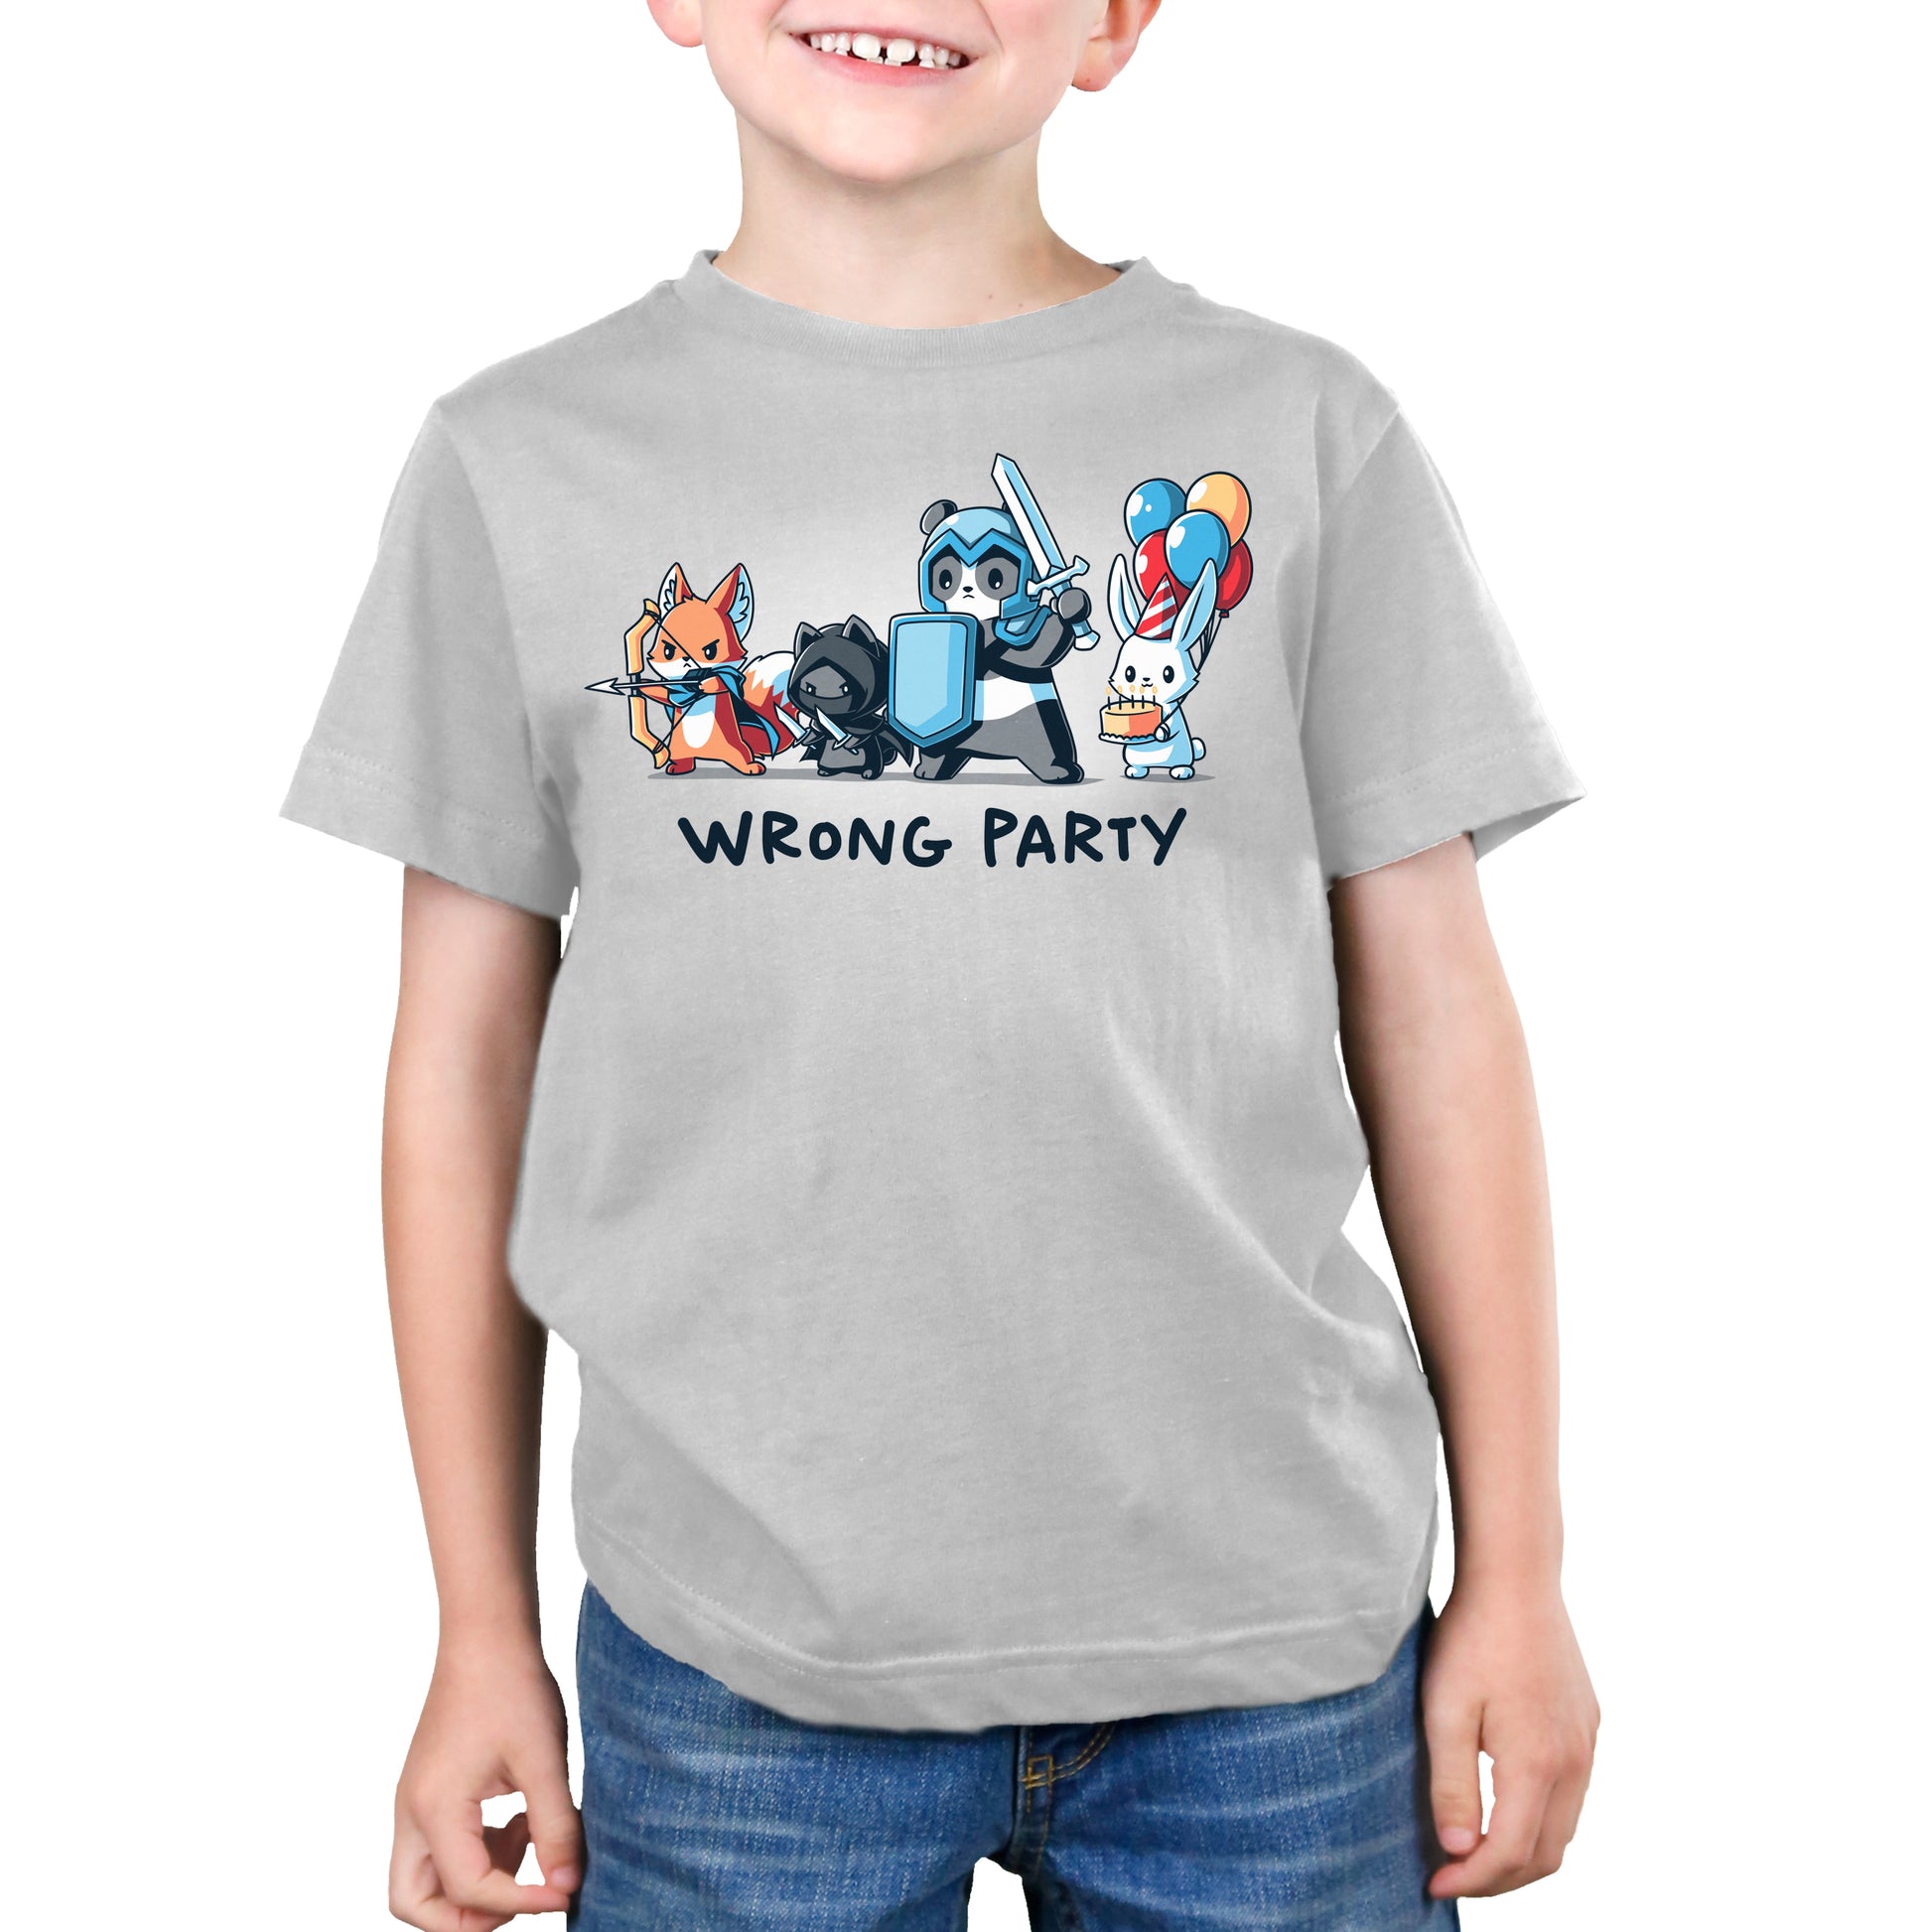 A young boy wearing a TeeTurtle t-shirt that says "Wrong Party.